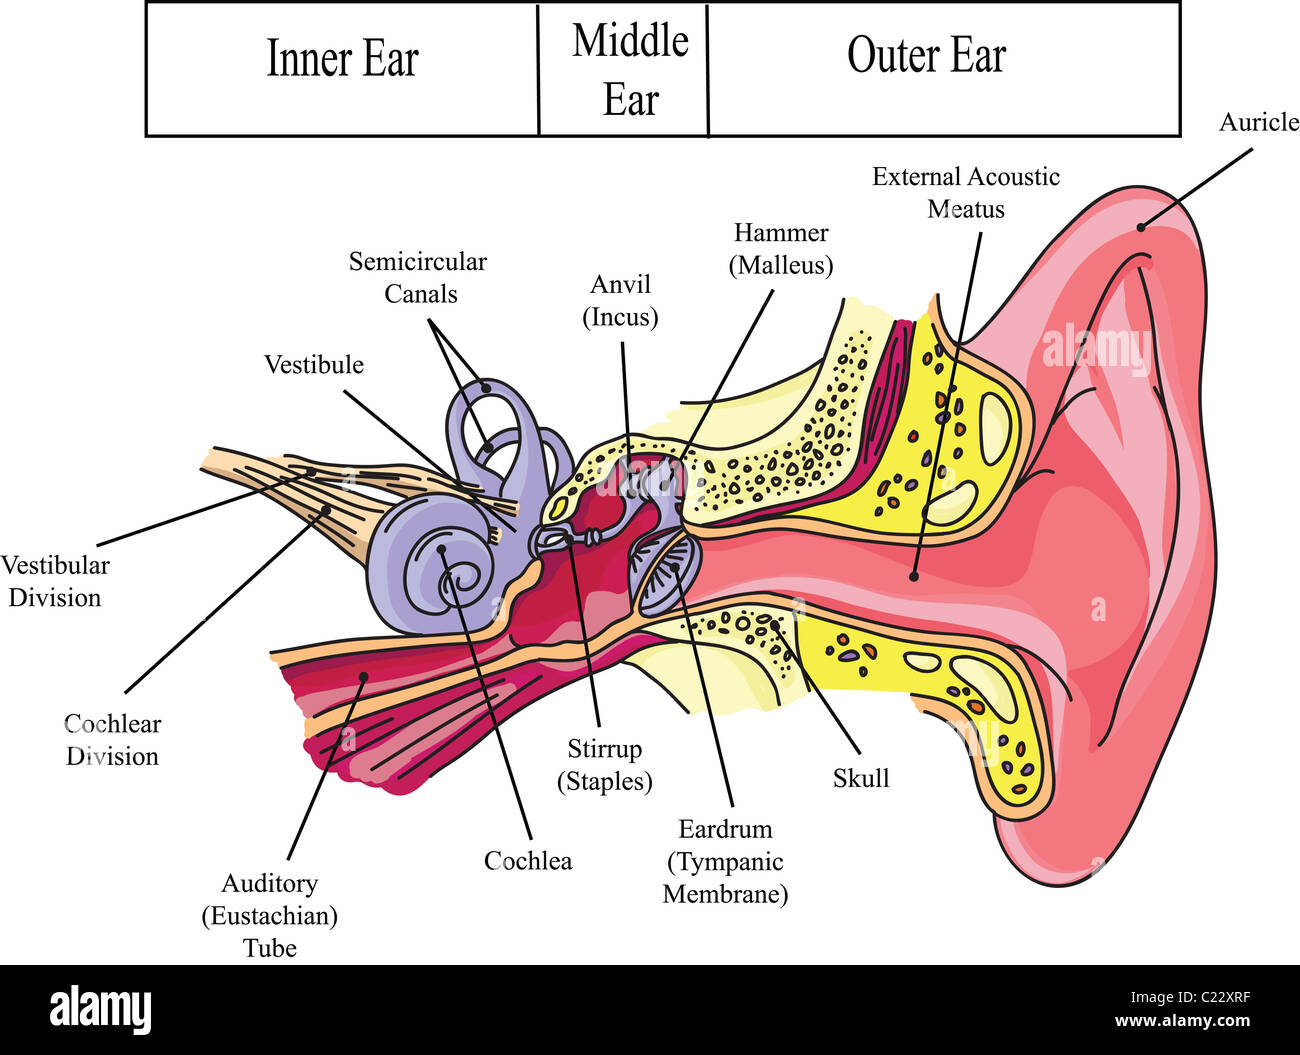 Structure of human ear illustration Stock Photo